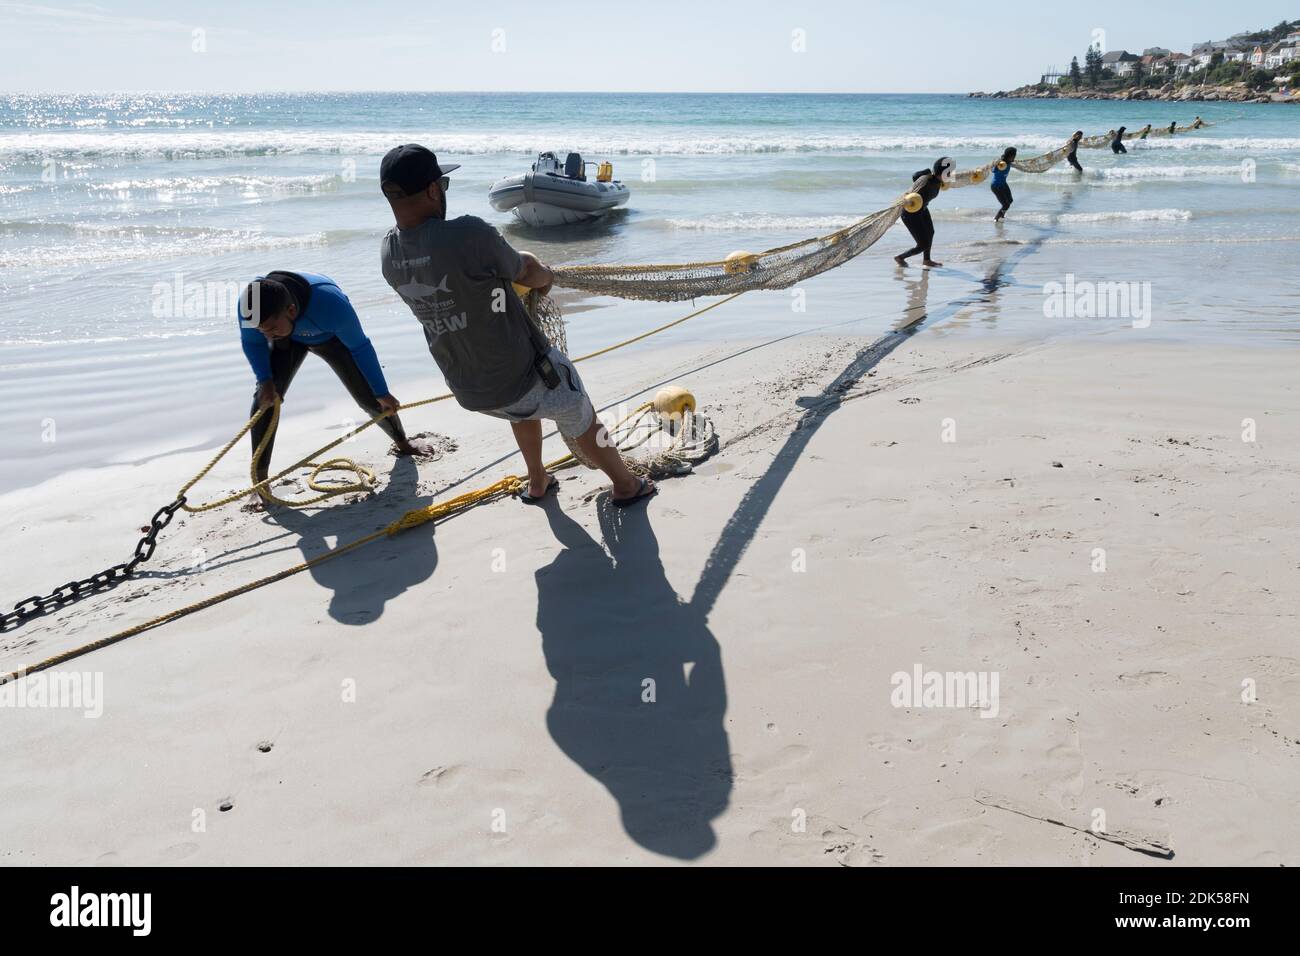 A Shark Spotters crew deploys a net shark exclusion barrier at Fish Hoek Beach, False Bay, Cape Town, South Africa. Bather protection. Tourism. Stock Photo